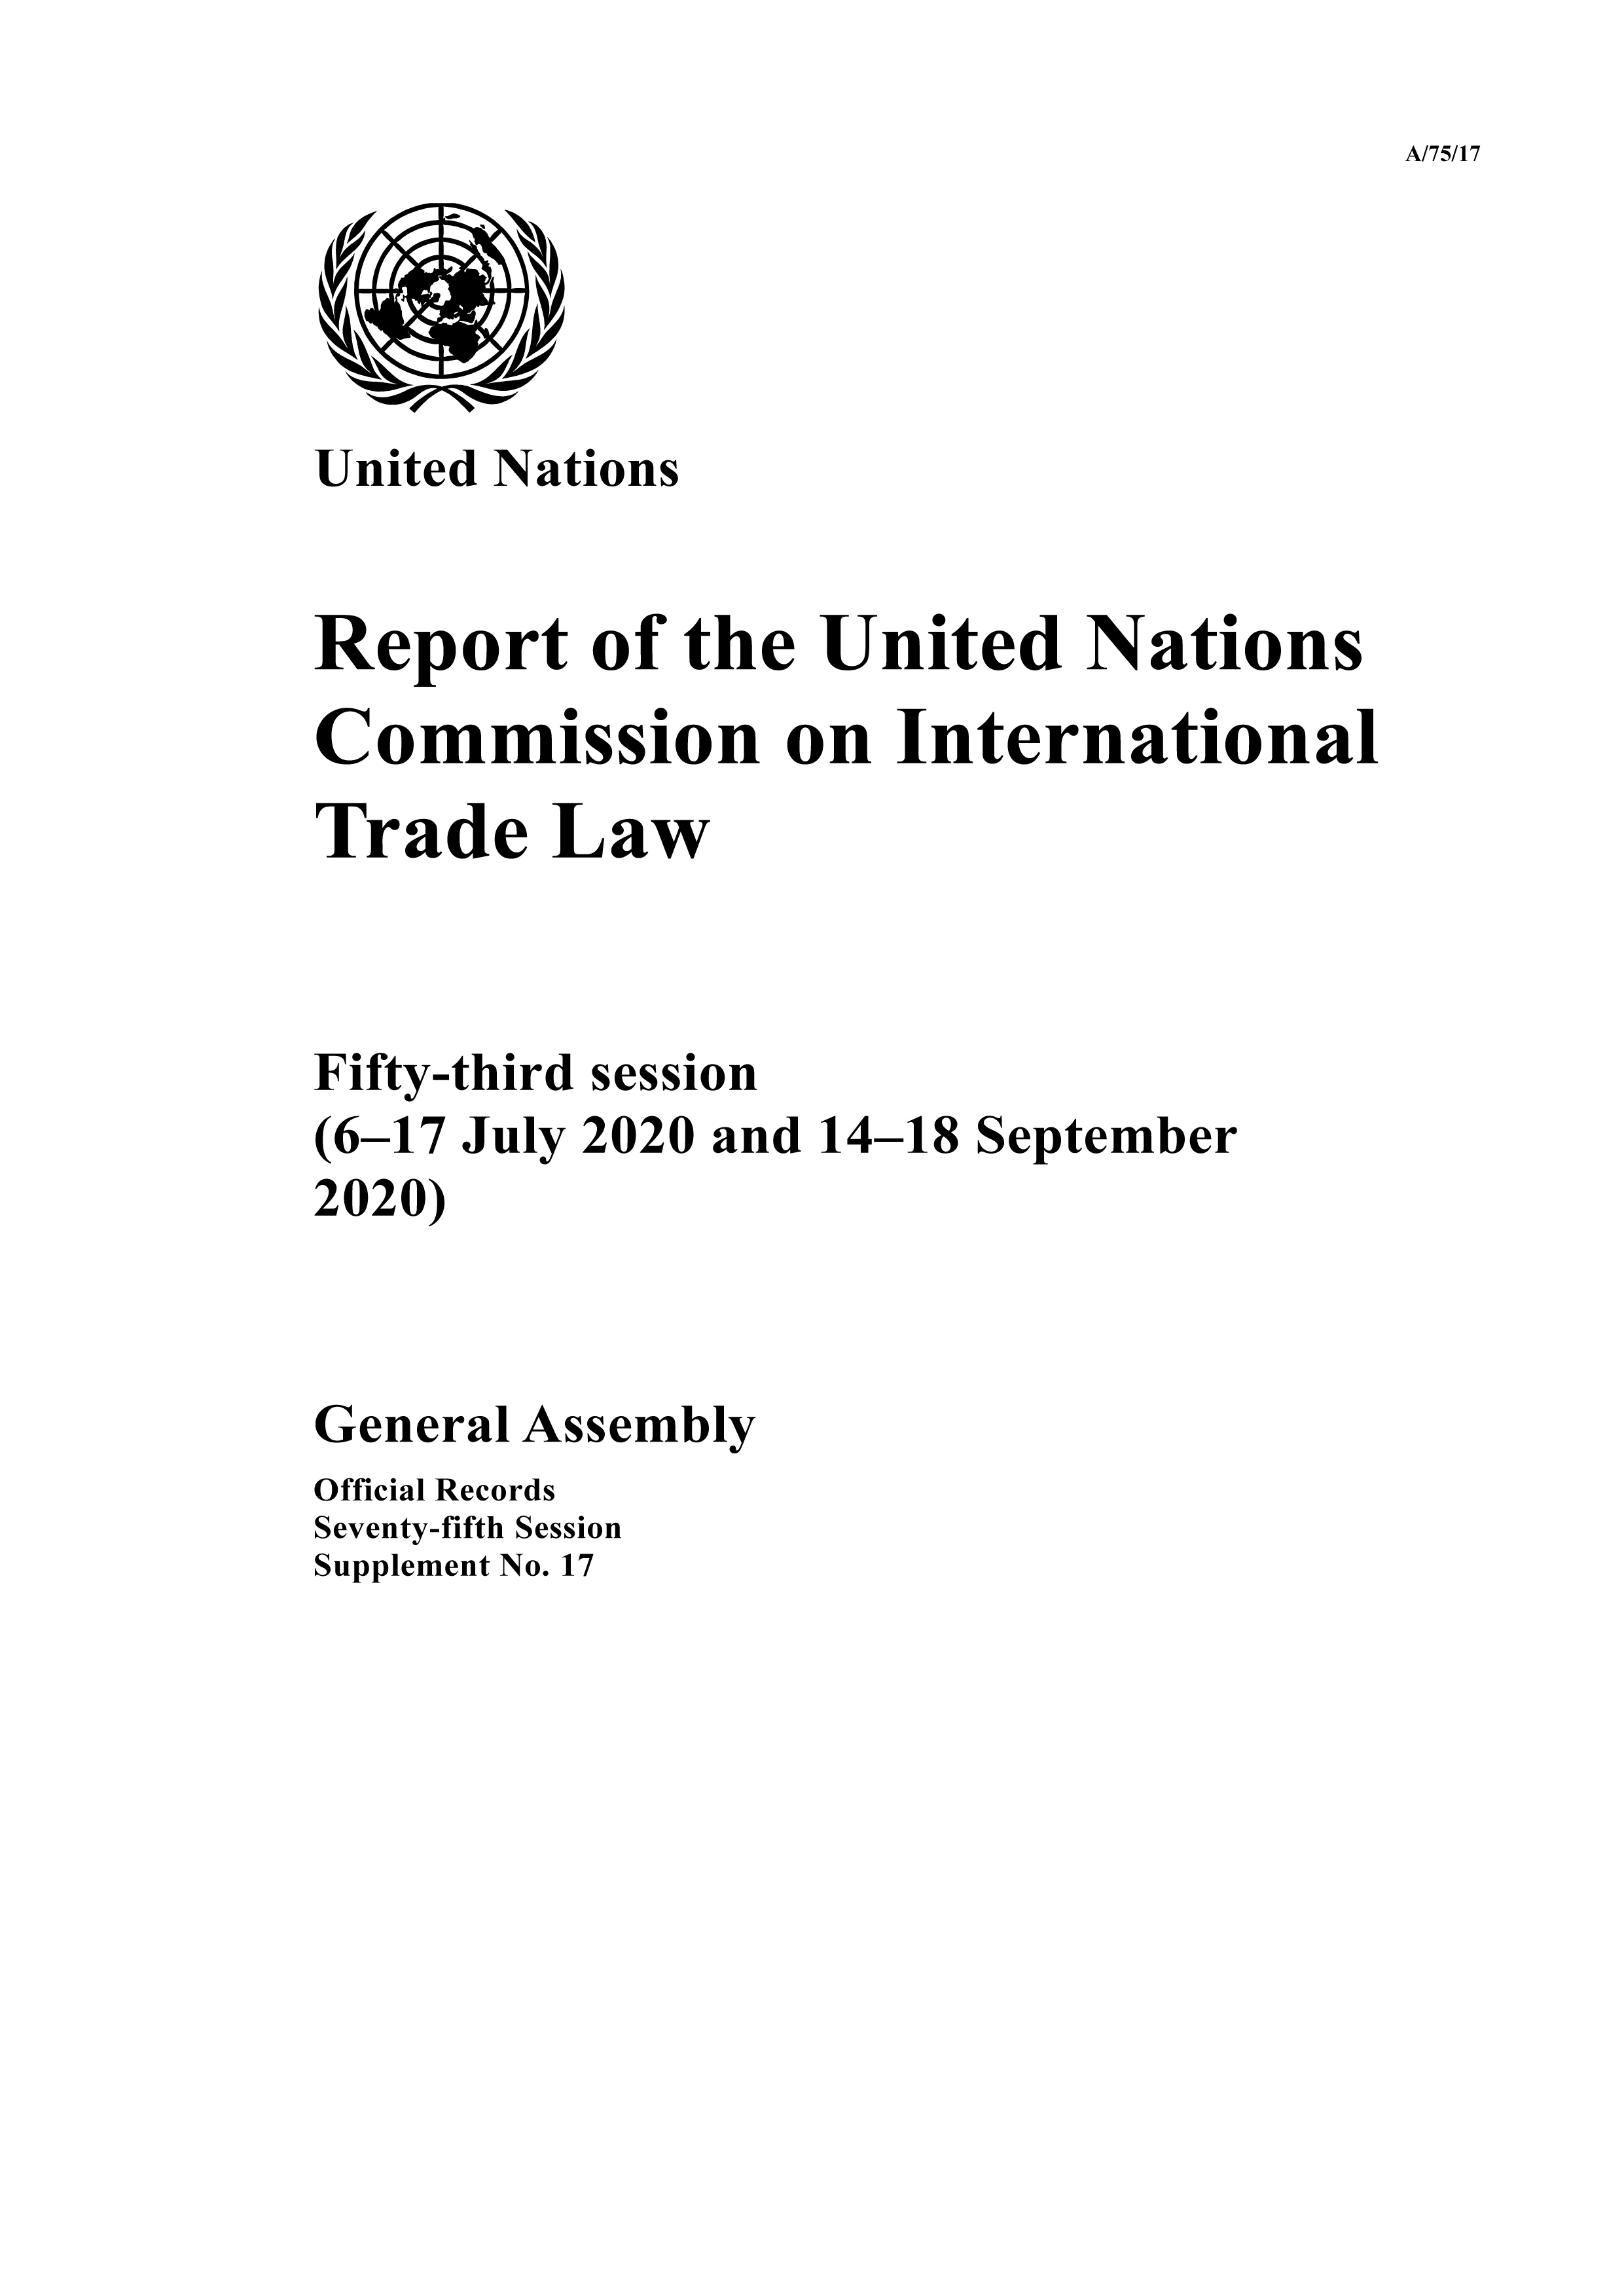 image of Report of the United Nations Commission on International Trade Law on its resumed fifty-third session, held in Vienna (with online participation), from 14 to 18 September 2020